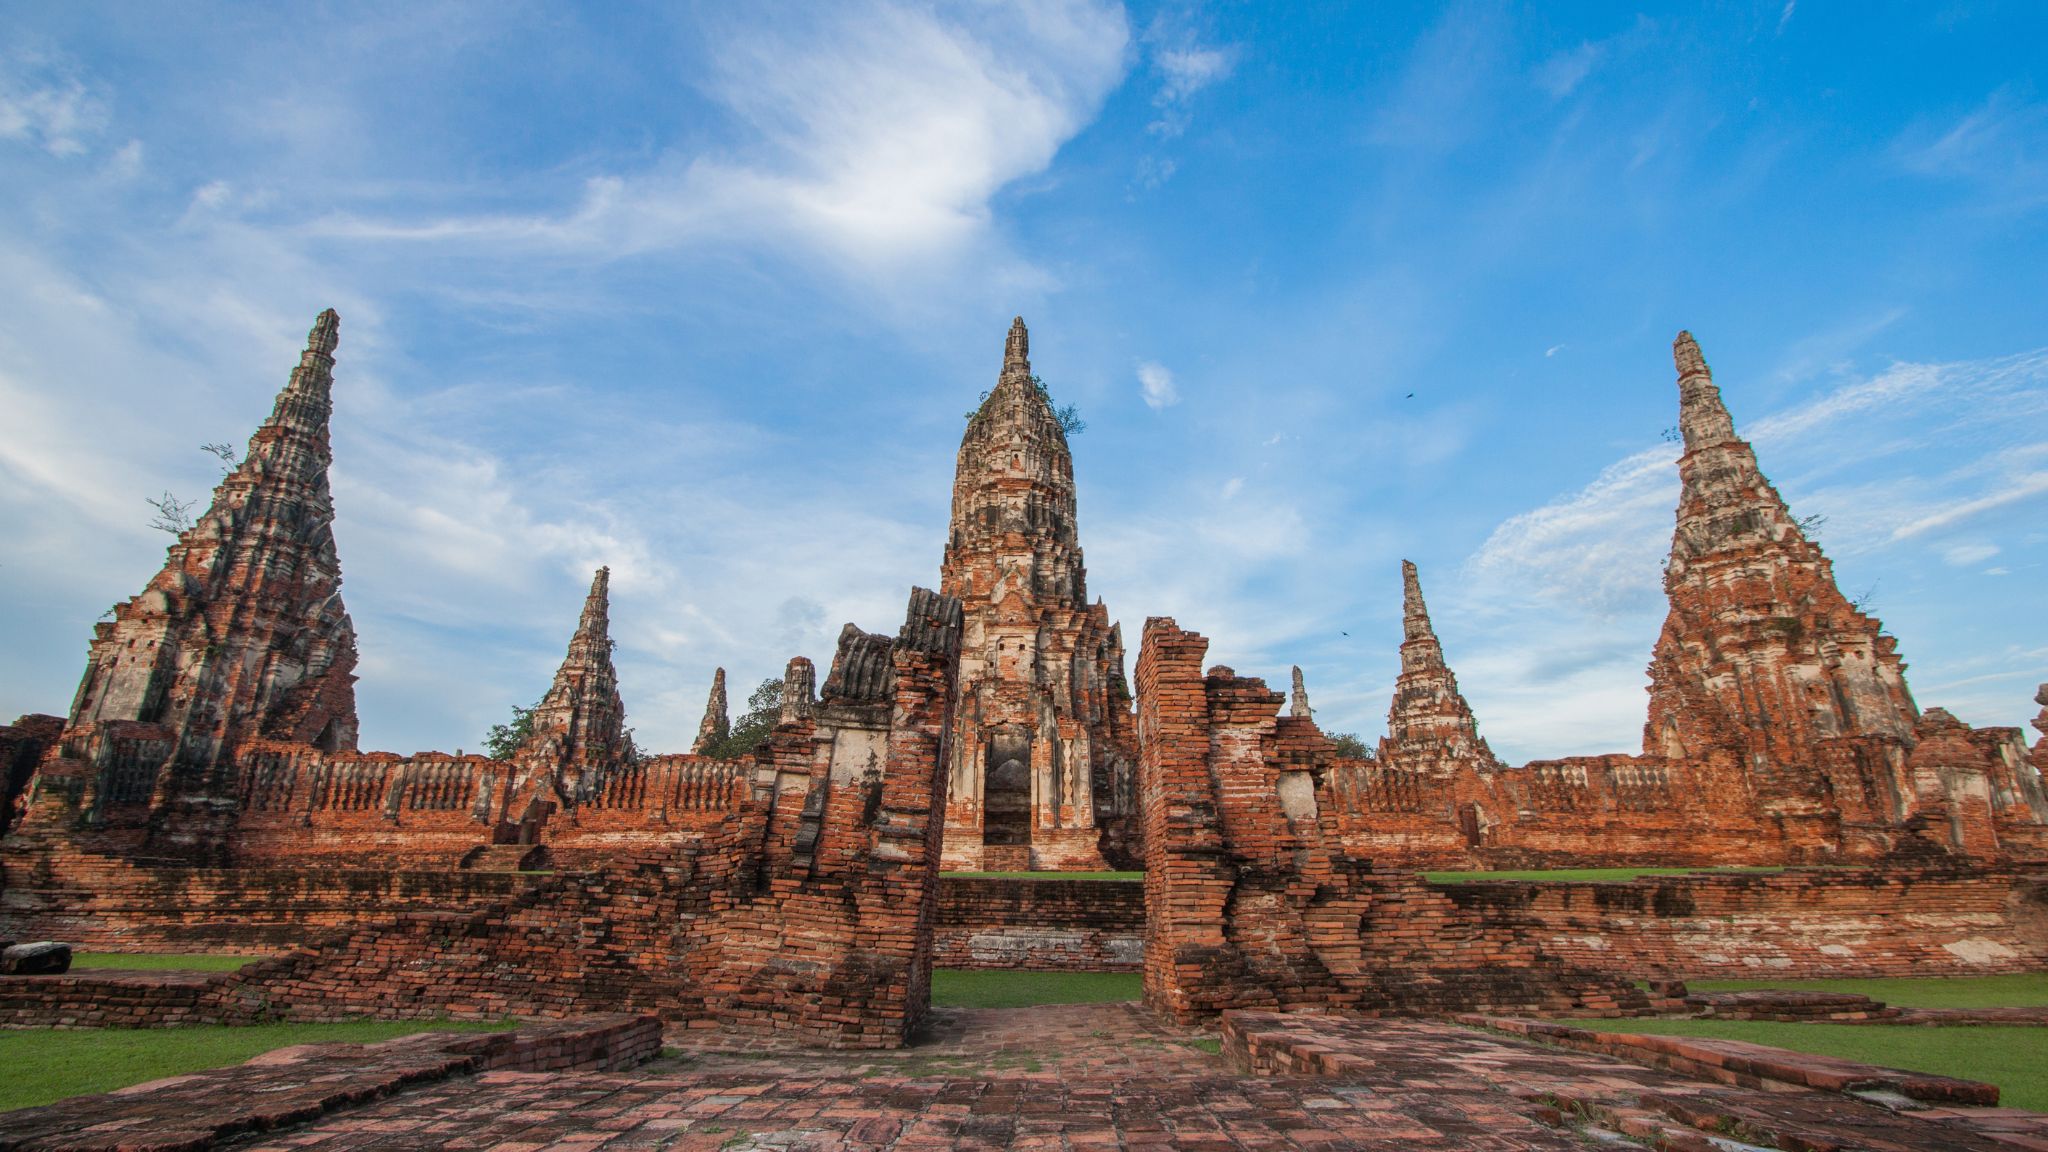 Day 3 Discover Ayutthaya By Boat